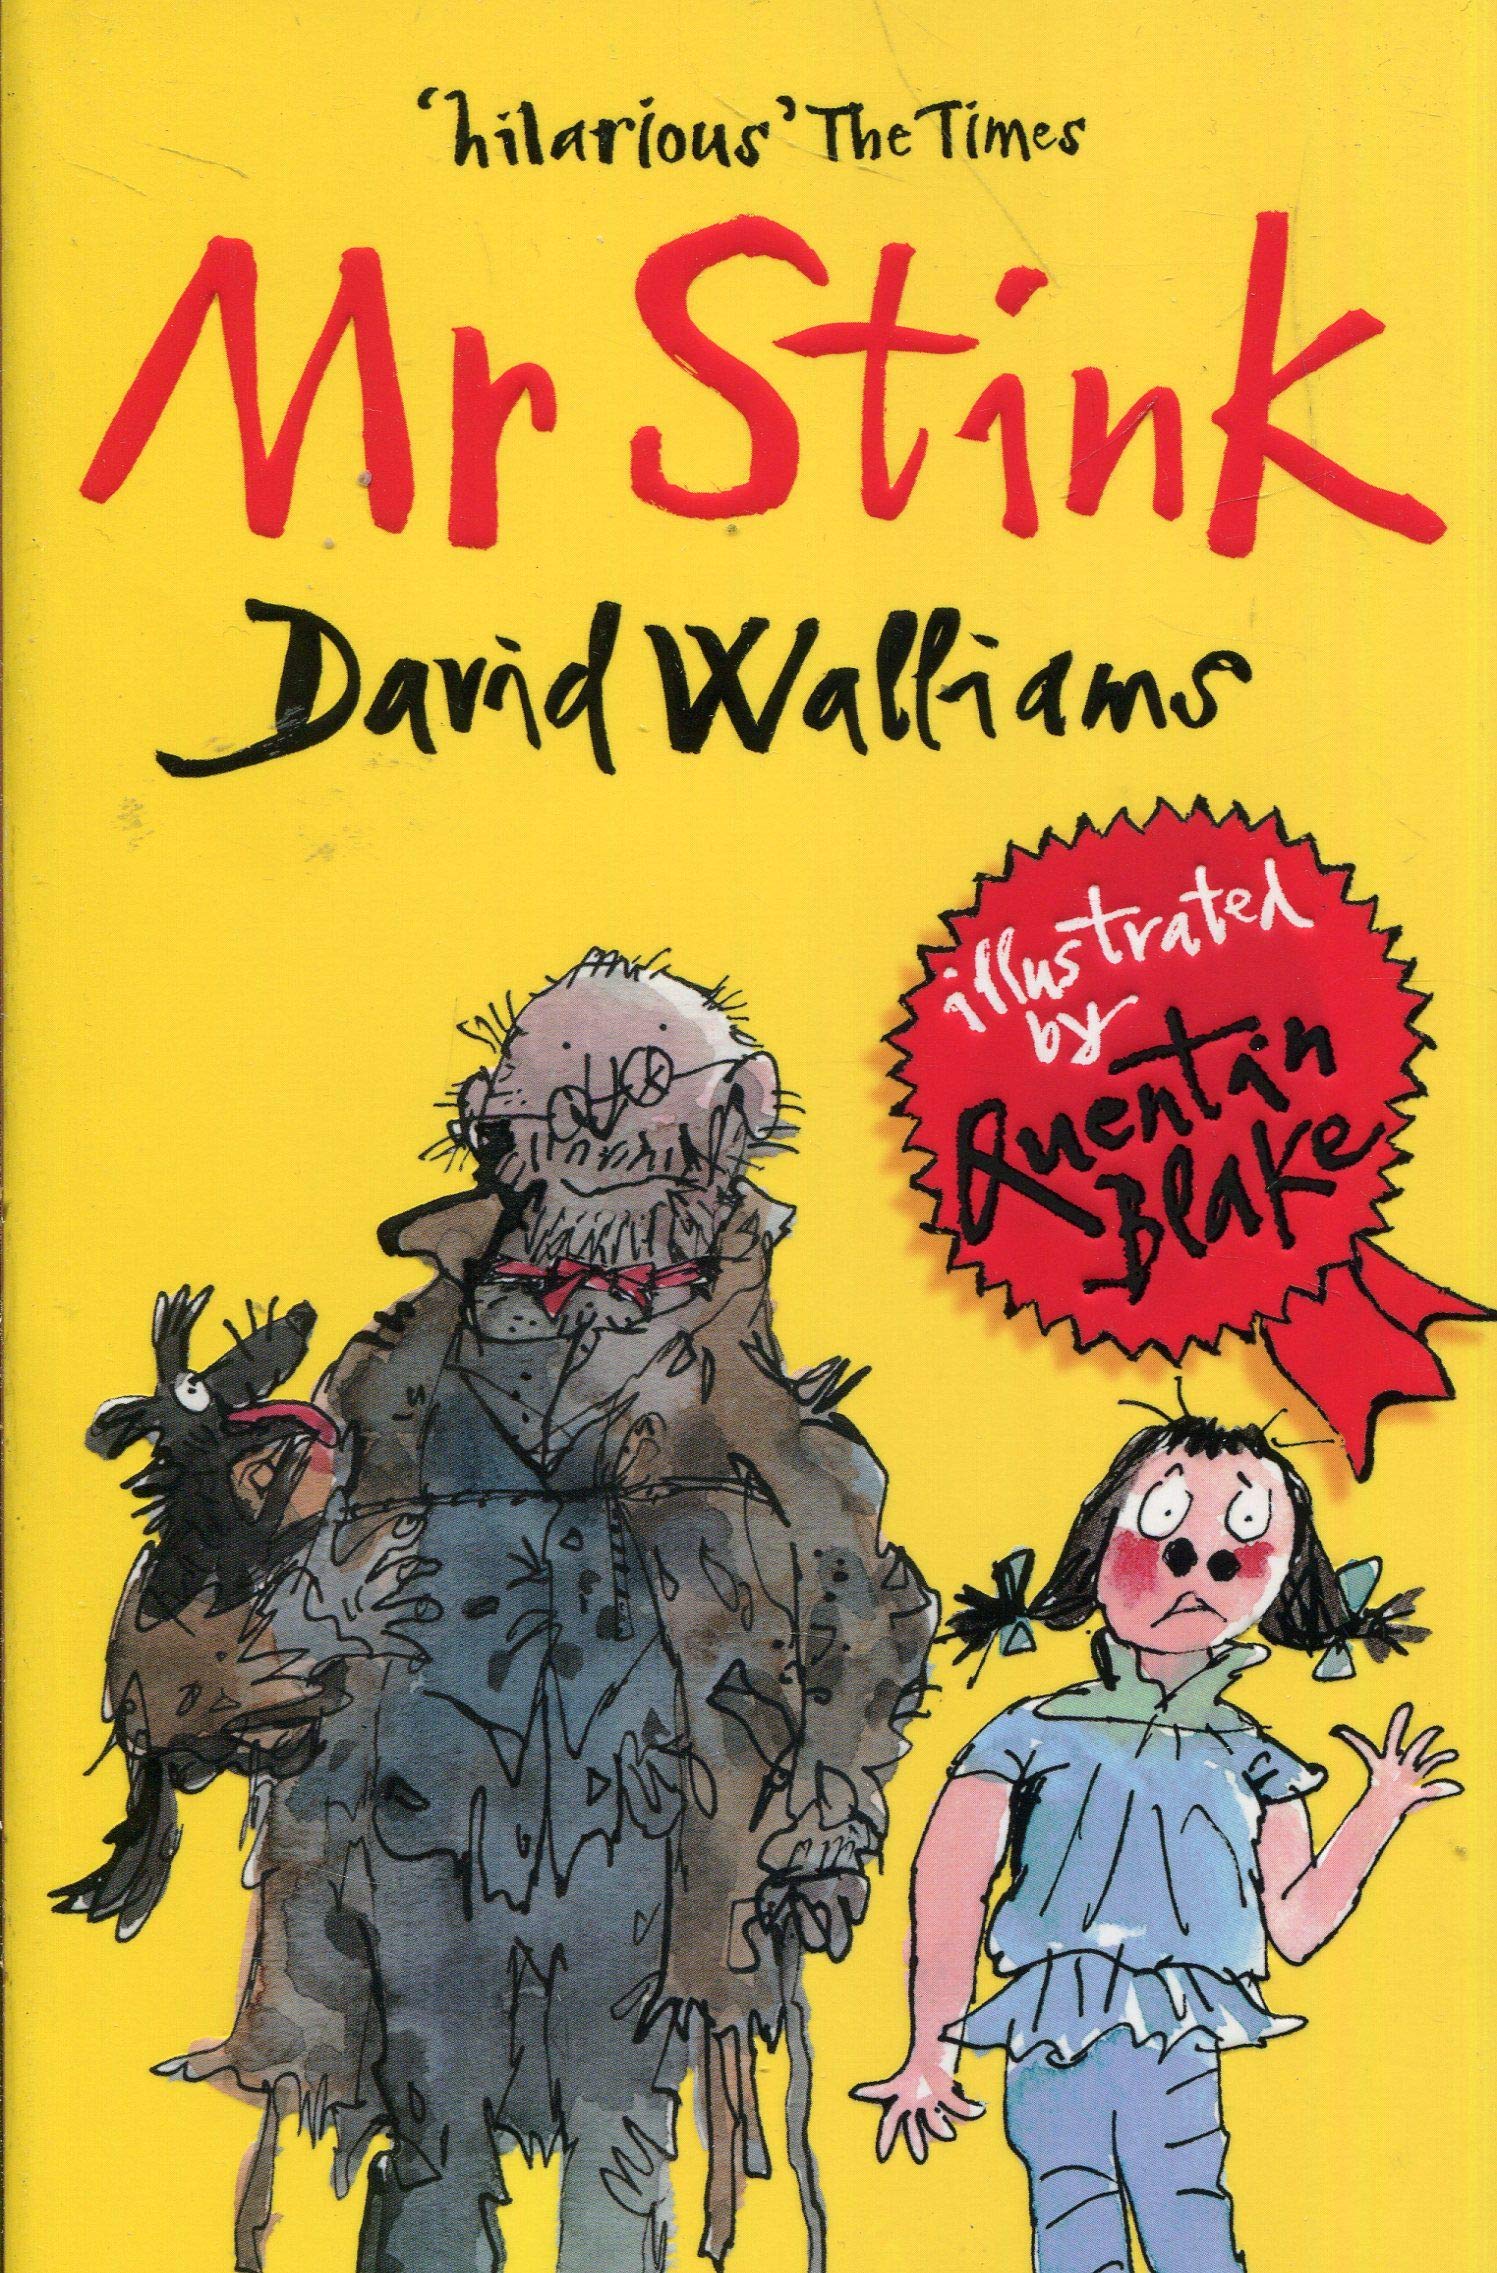 English Books :: By Categories :: Children’s Books :: Mr Stink